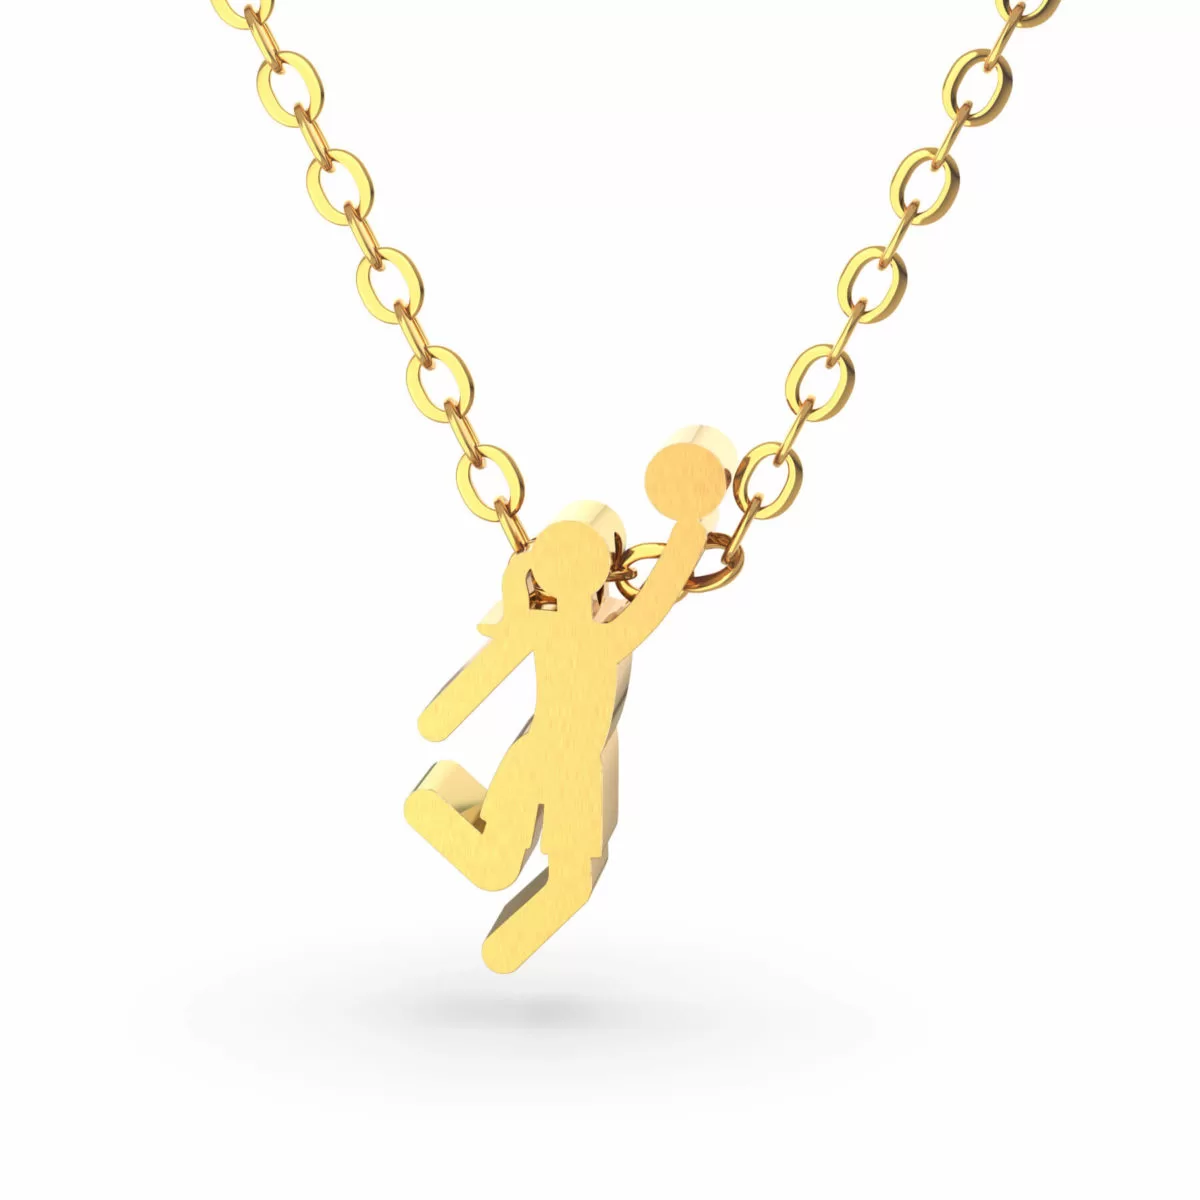 Basketball Pendant Necklace Gold